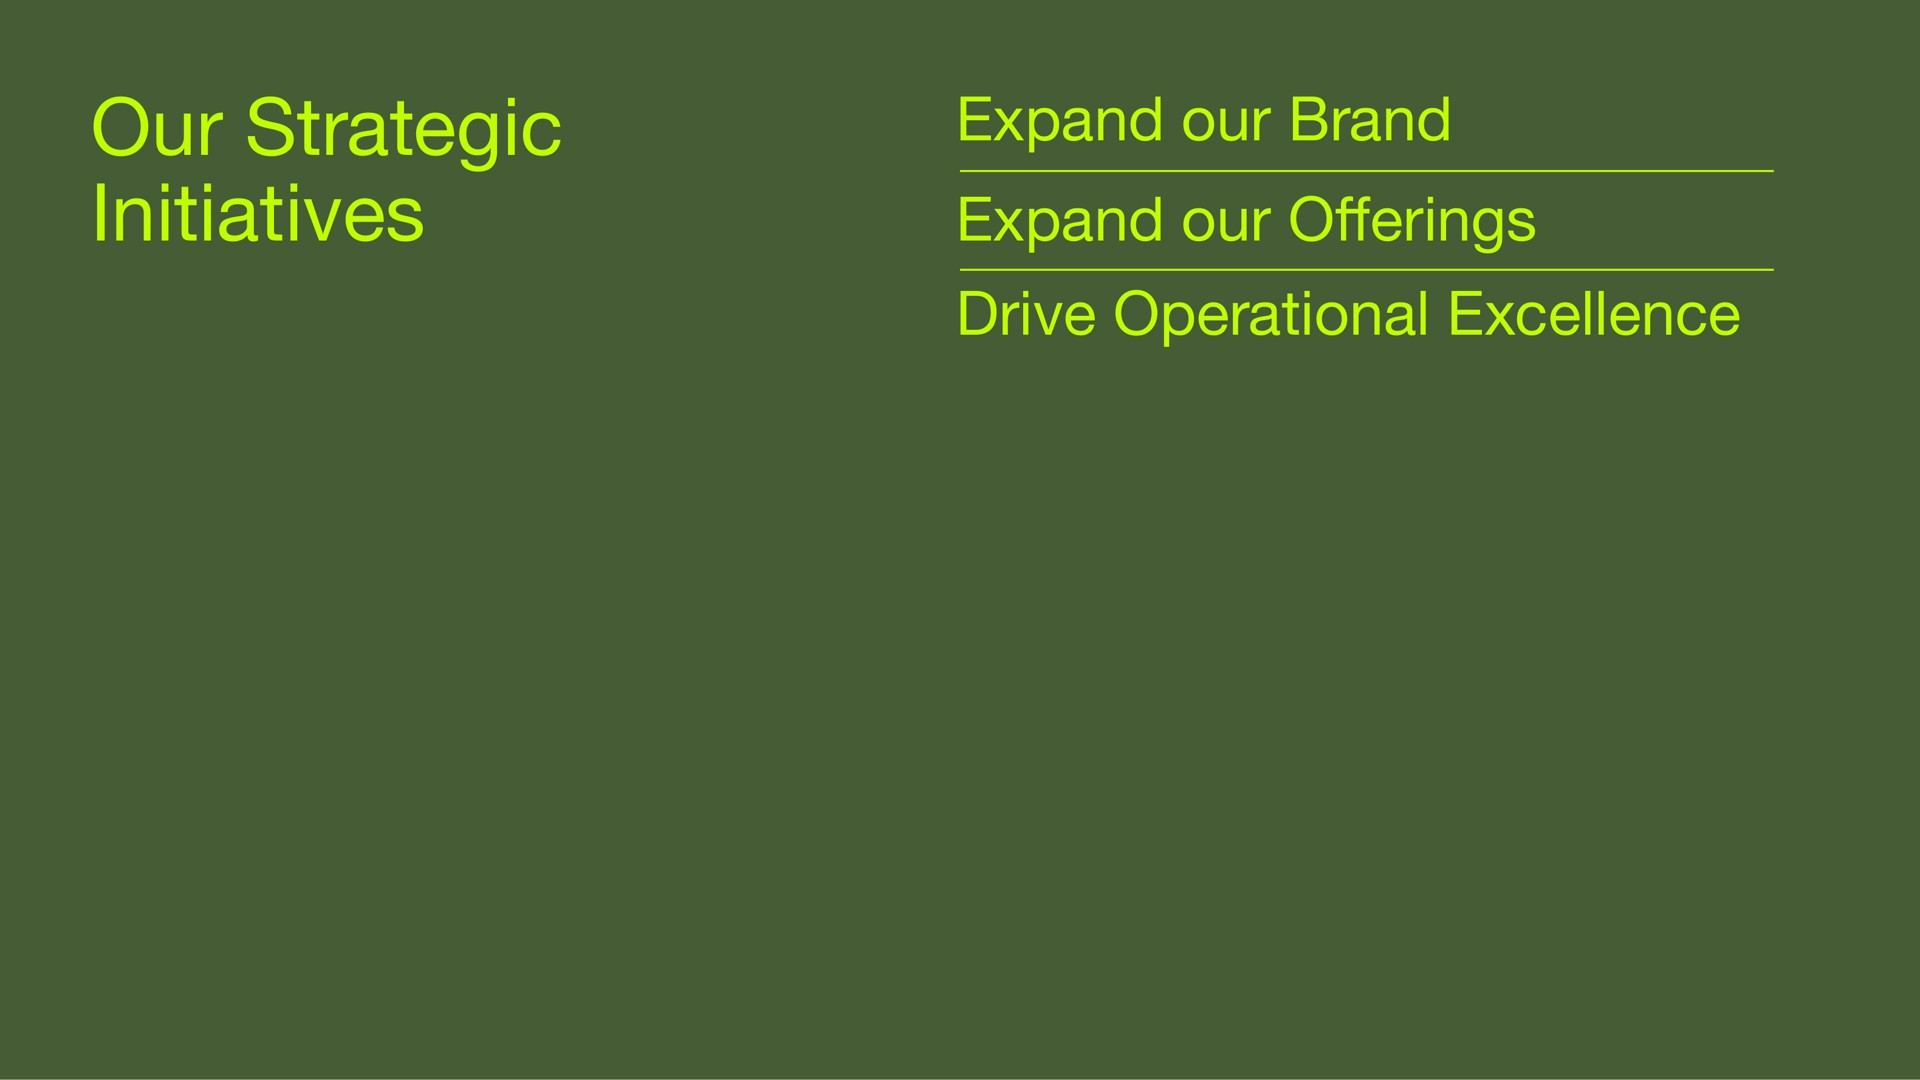 our strategic initiatives expand our brand expand our drive operational excellence offerings | Sonos